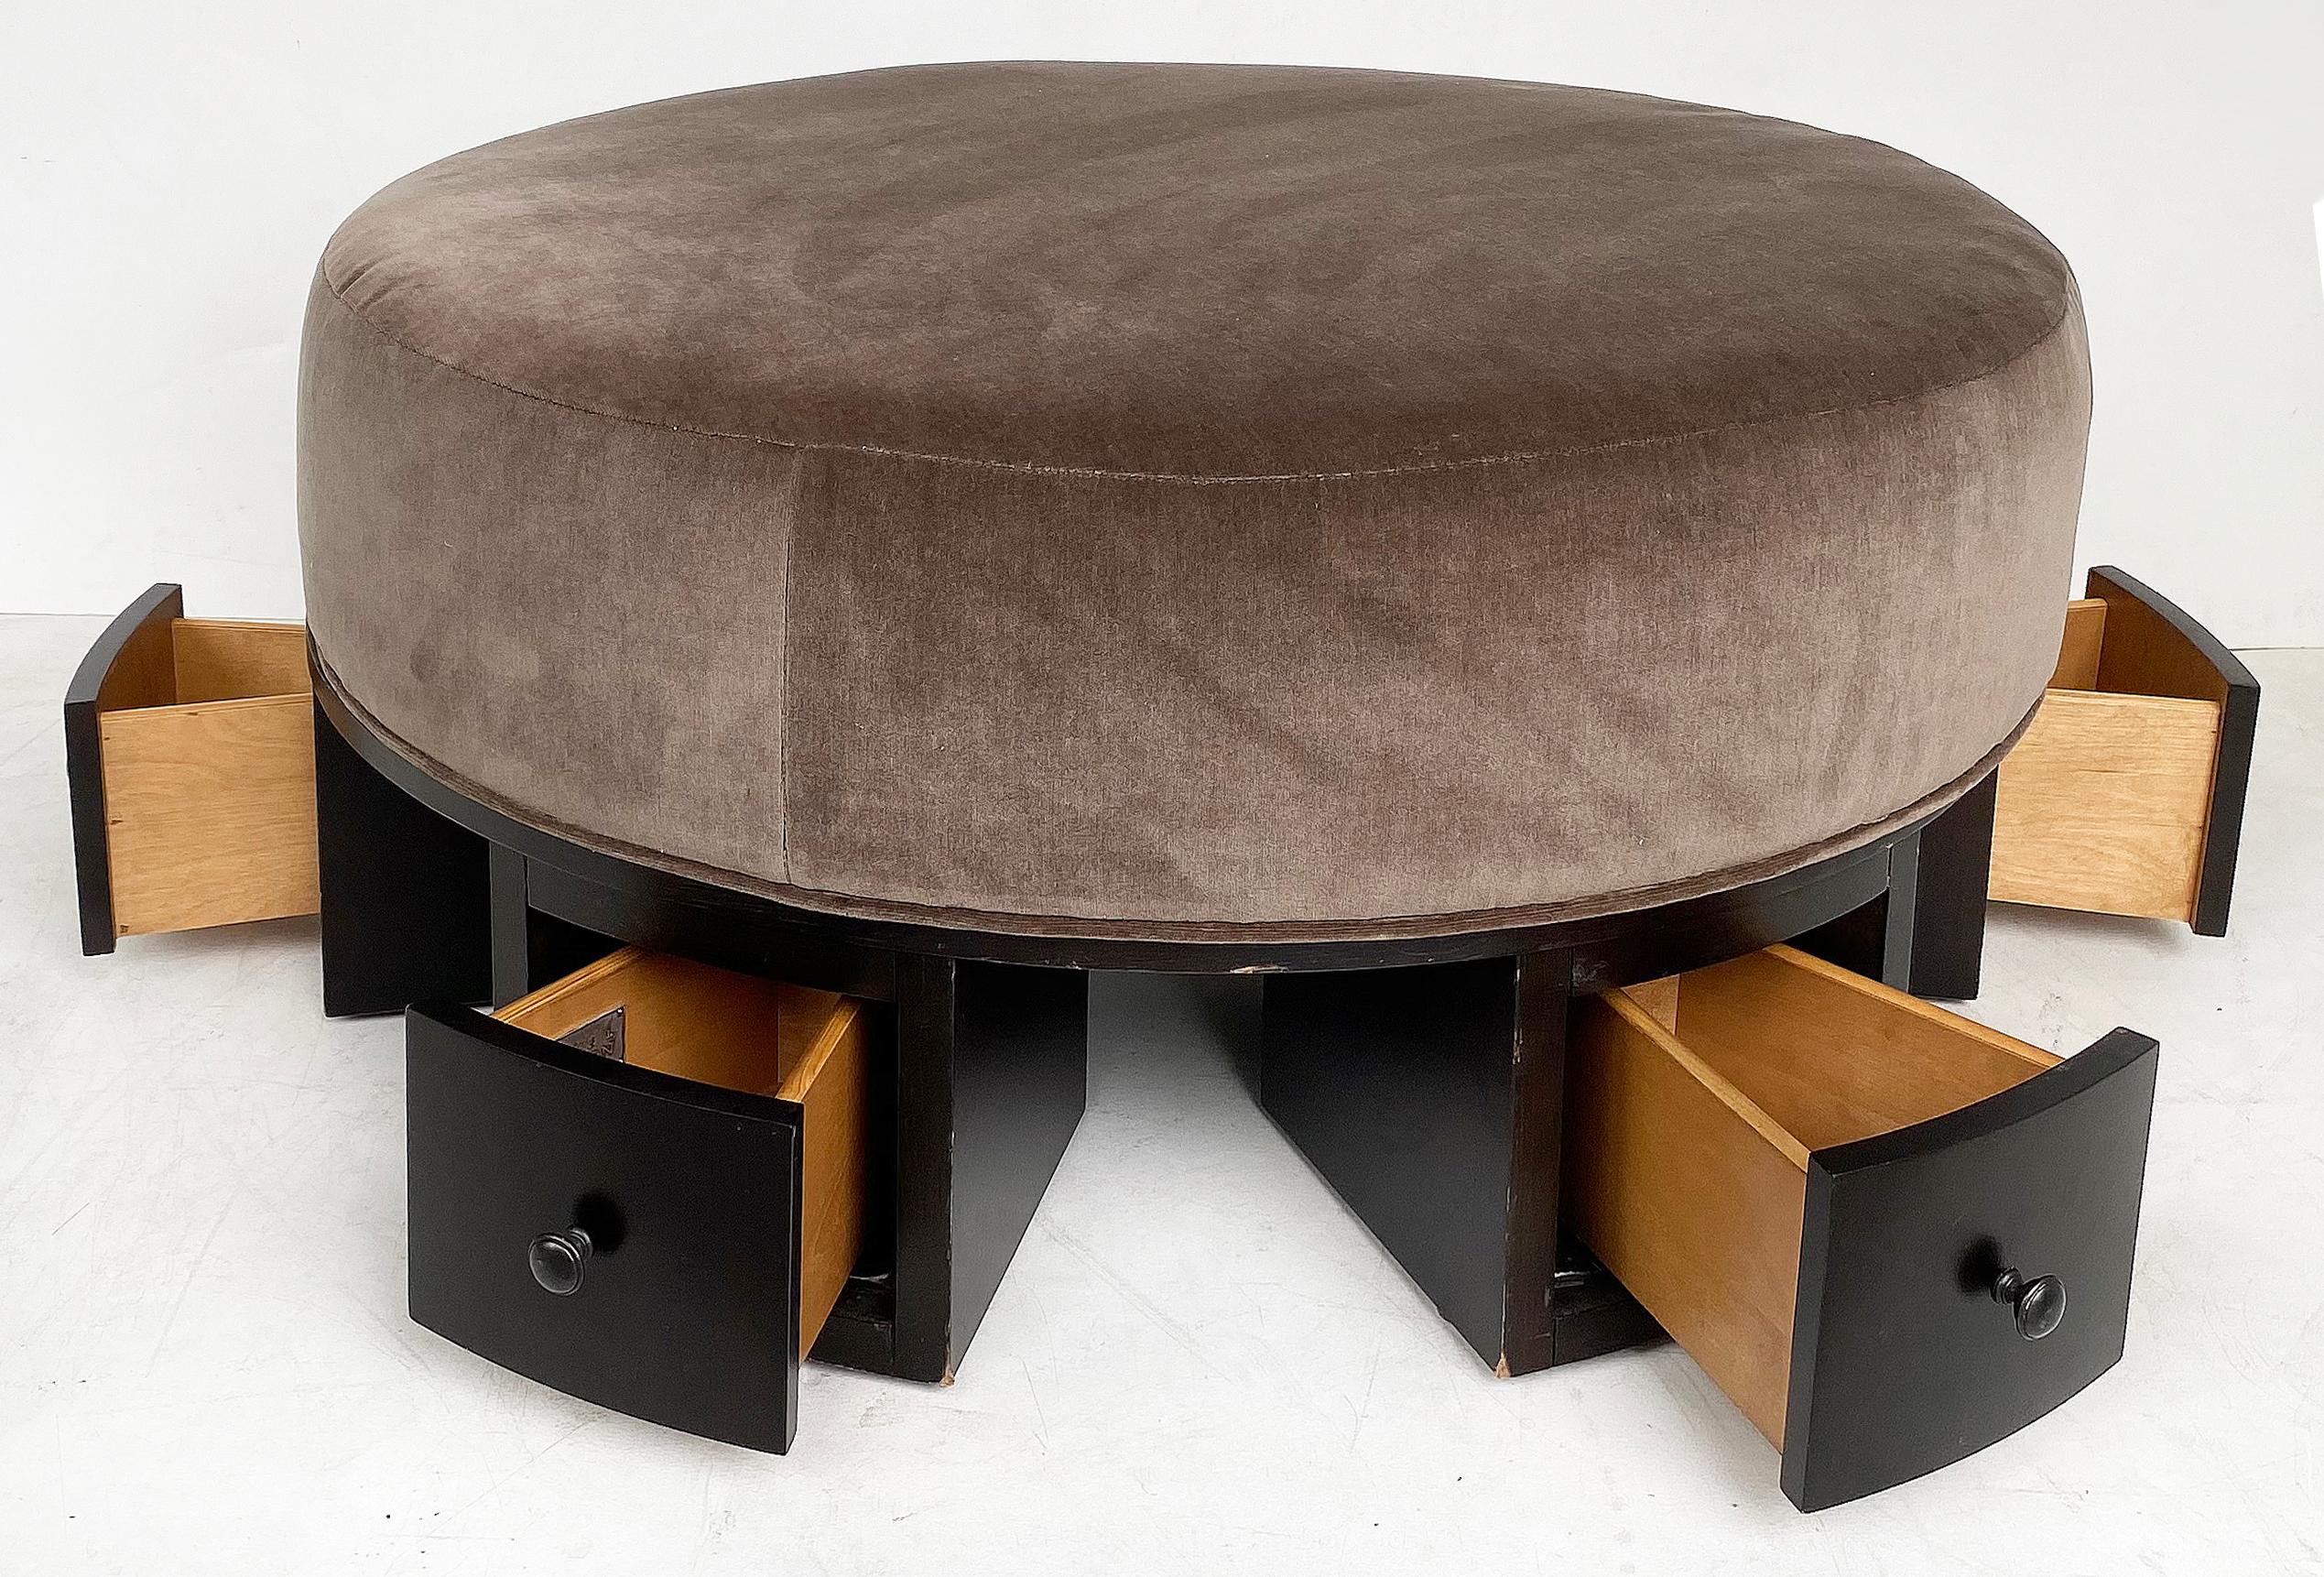 Large ottoman pouf with drawers base by Hotel Maison

Offered for sale is an unusual overscale round ottoman in velvet that is supported upon a base that has wood drawers with pulls that surround the piece. The drawers offer storage and one